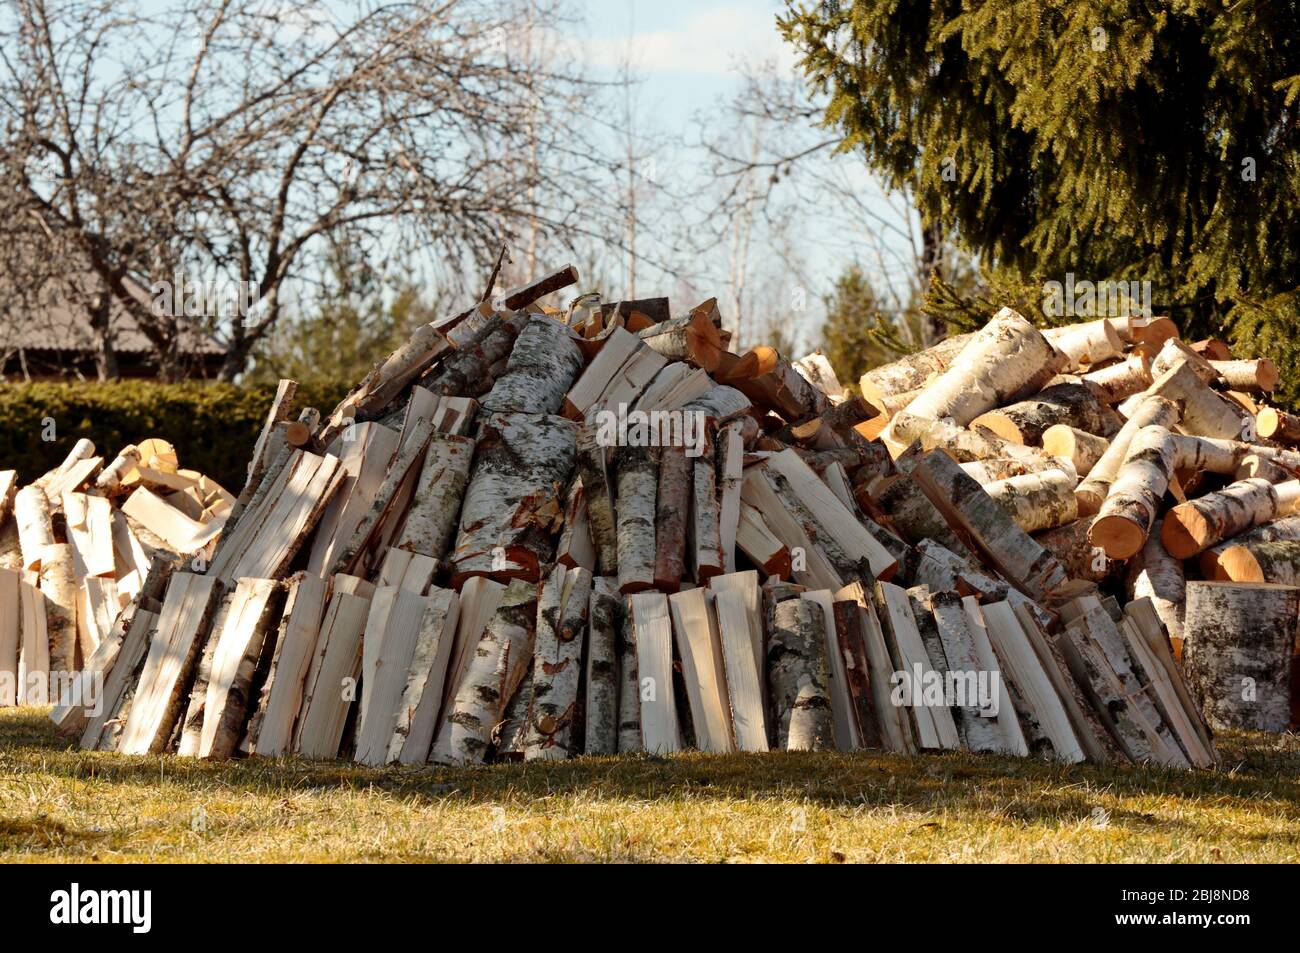 A pile of cut firewood drying in springlike sunny weather Stock Photo